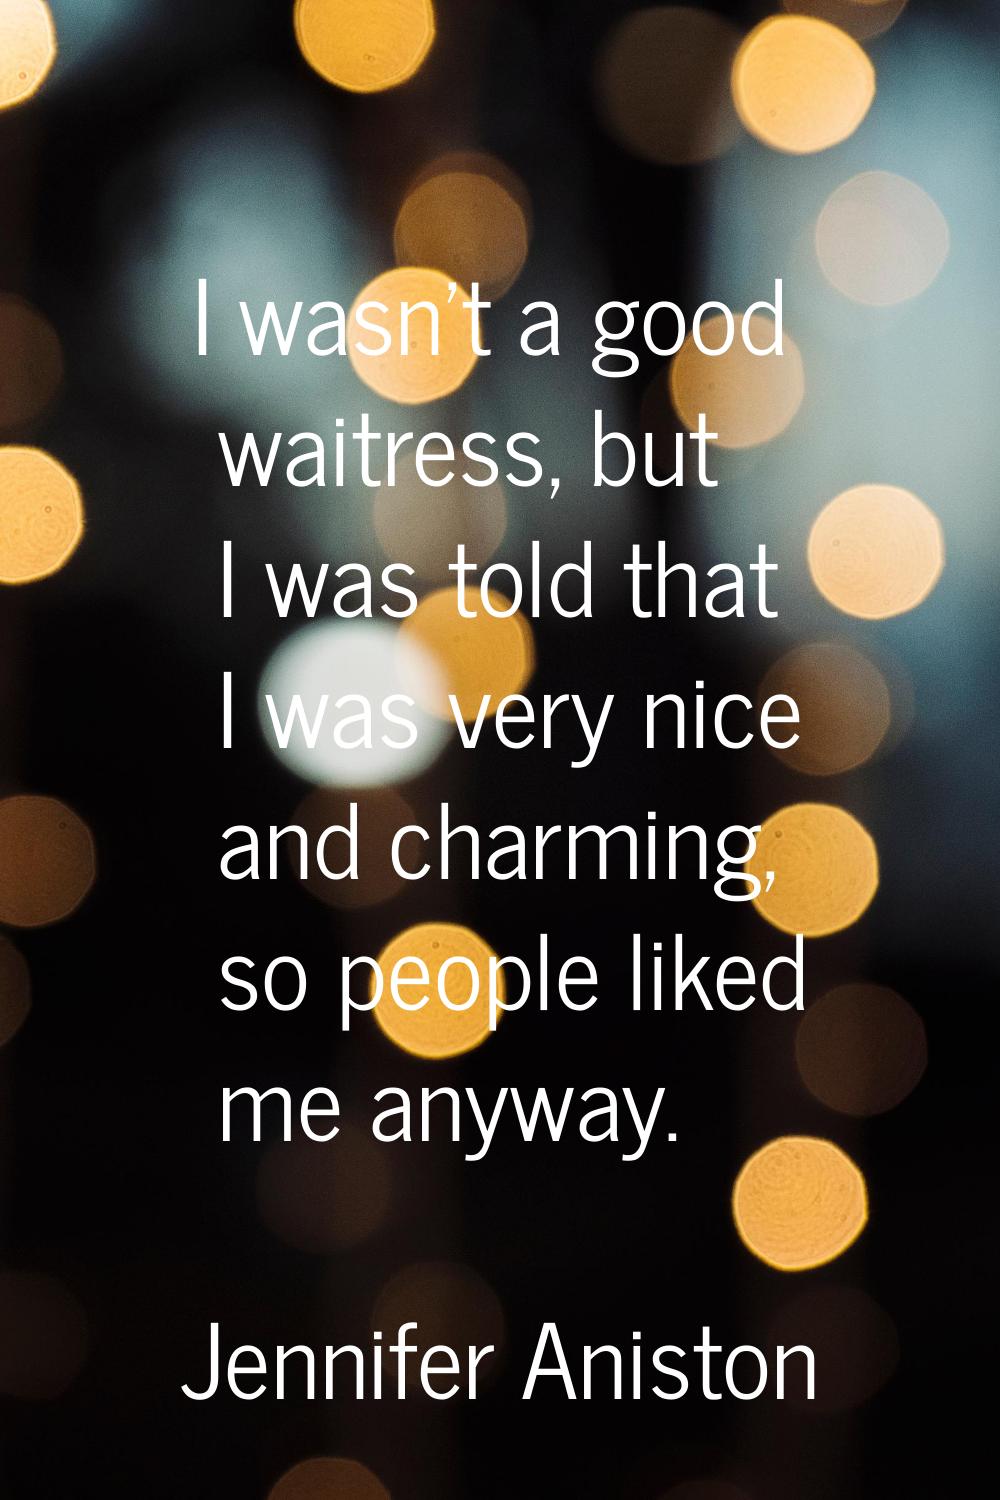 I wasn't a good waitress, but I was told that I was very nice and charming, so people liked me anyw